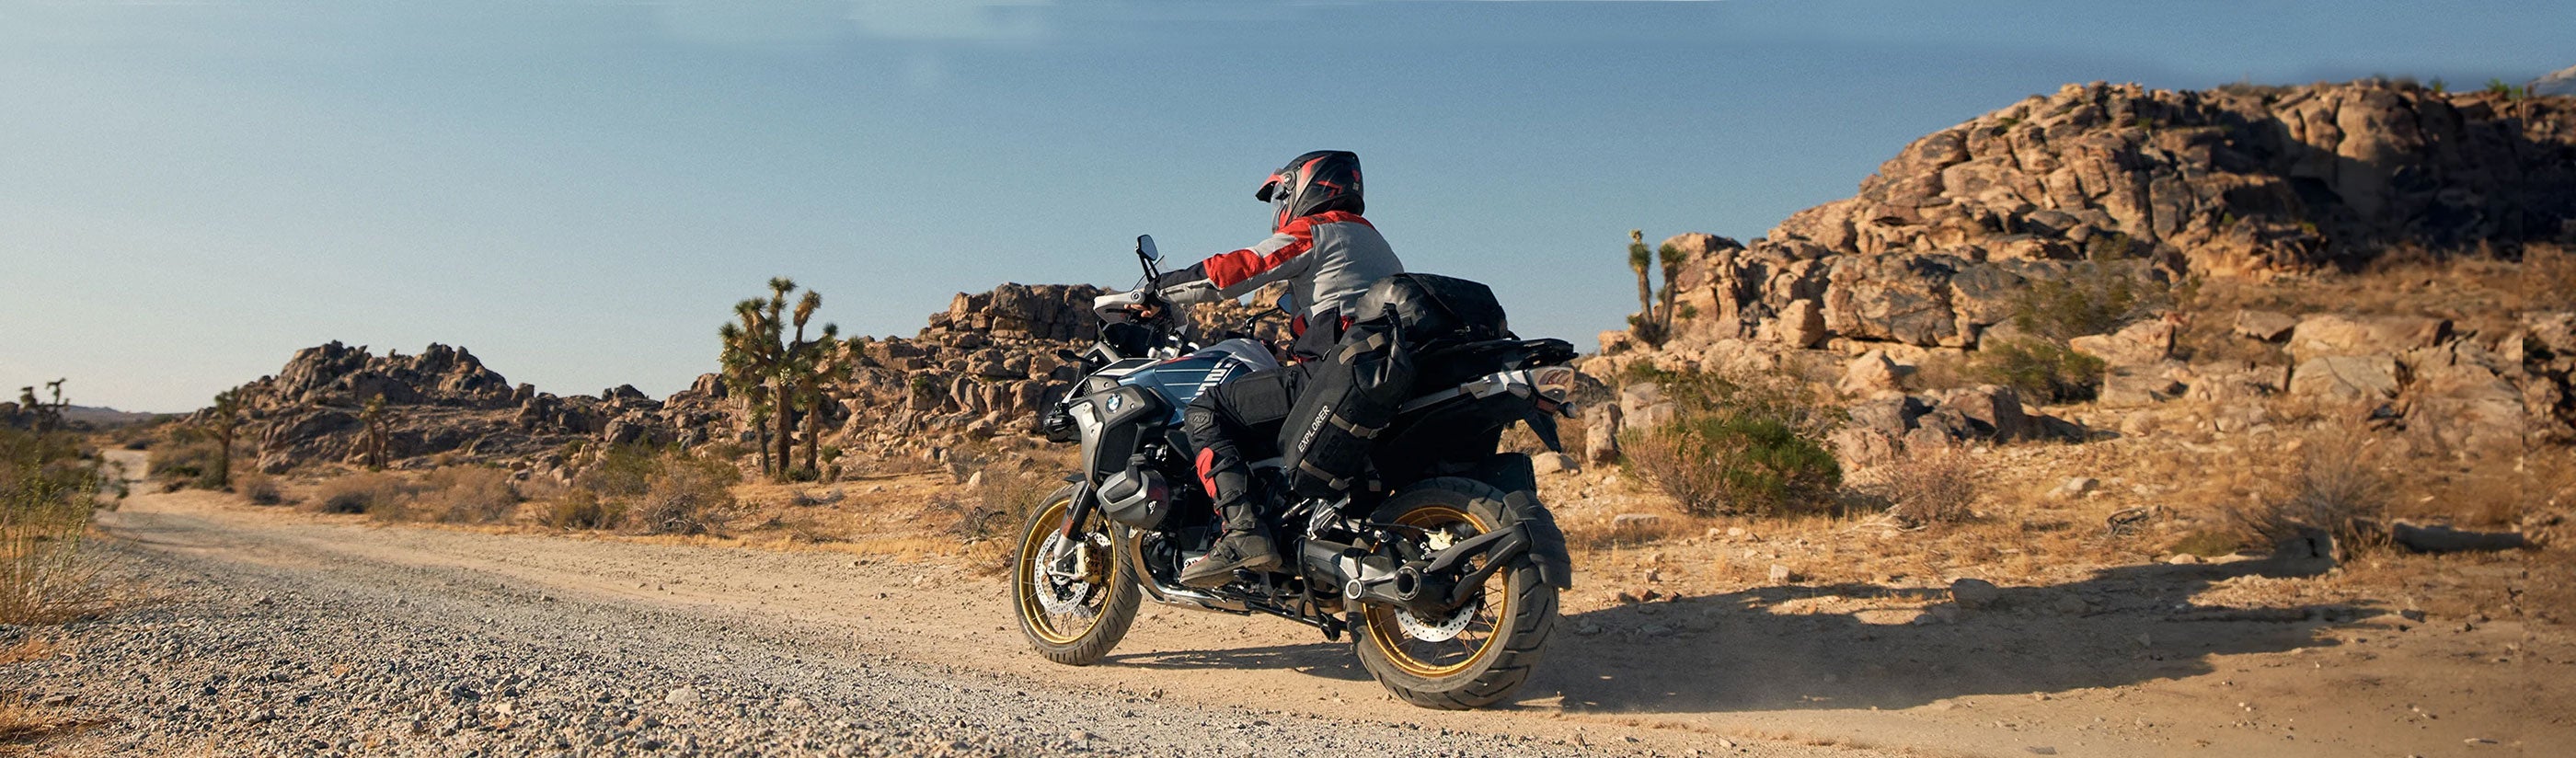 BMW Adventure Touring Duffel/Tail Bags